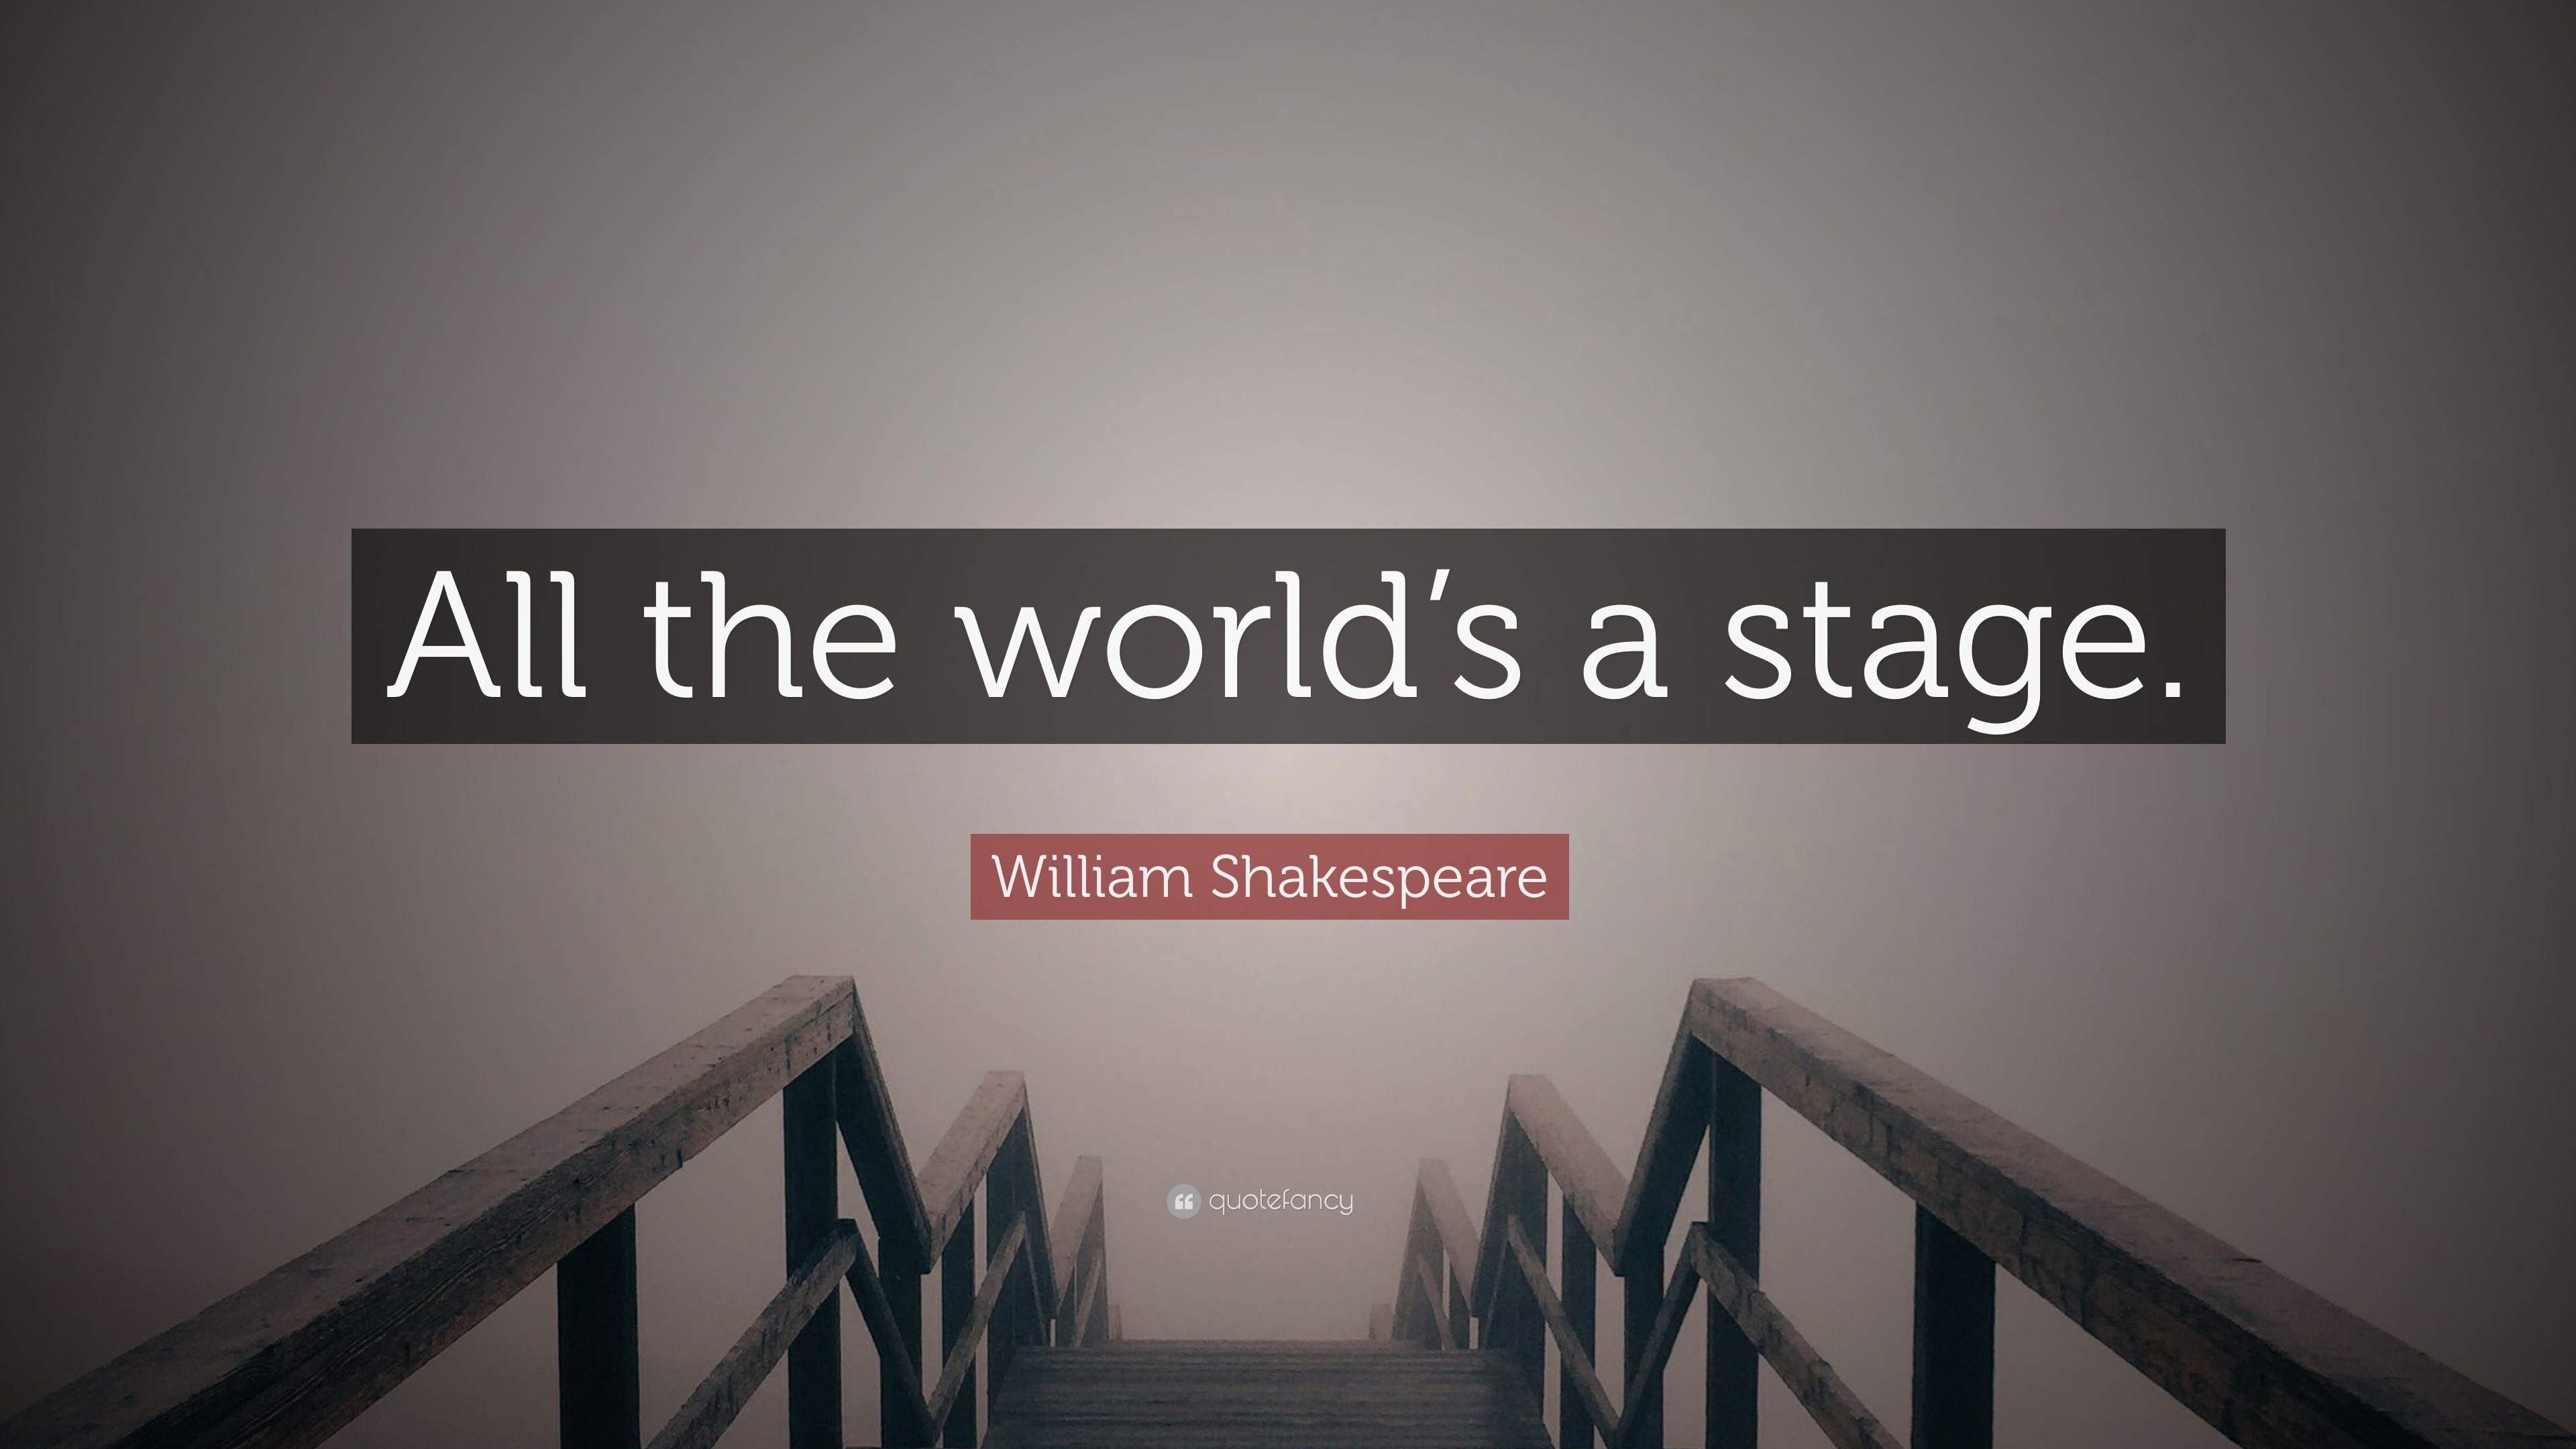 William Shakespeare Quote: “All the world’s a stage.” (20 wallpapers